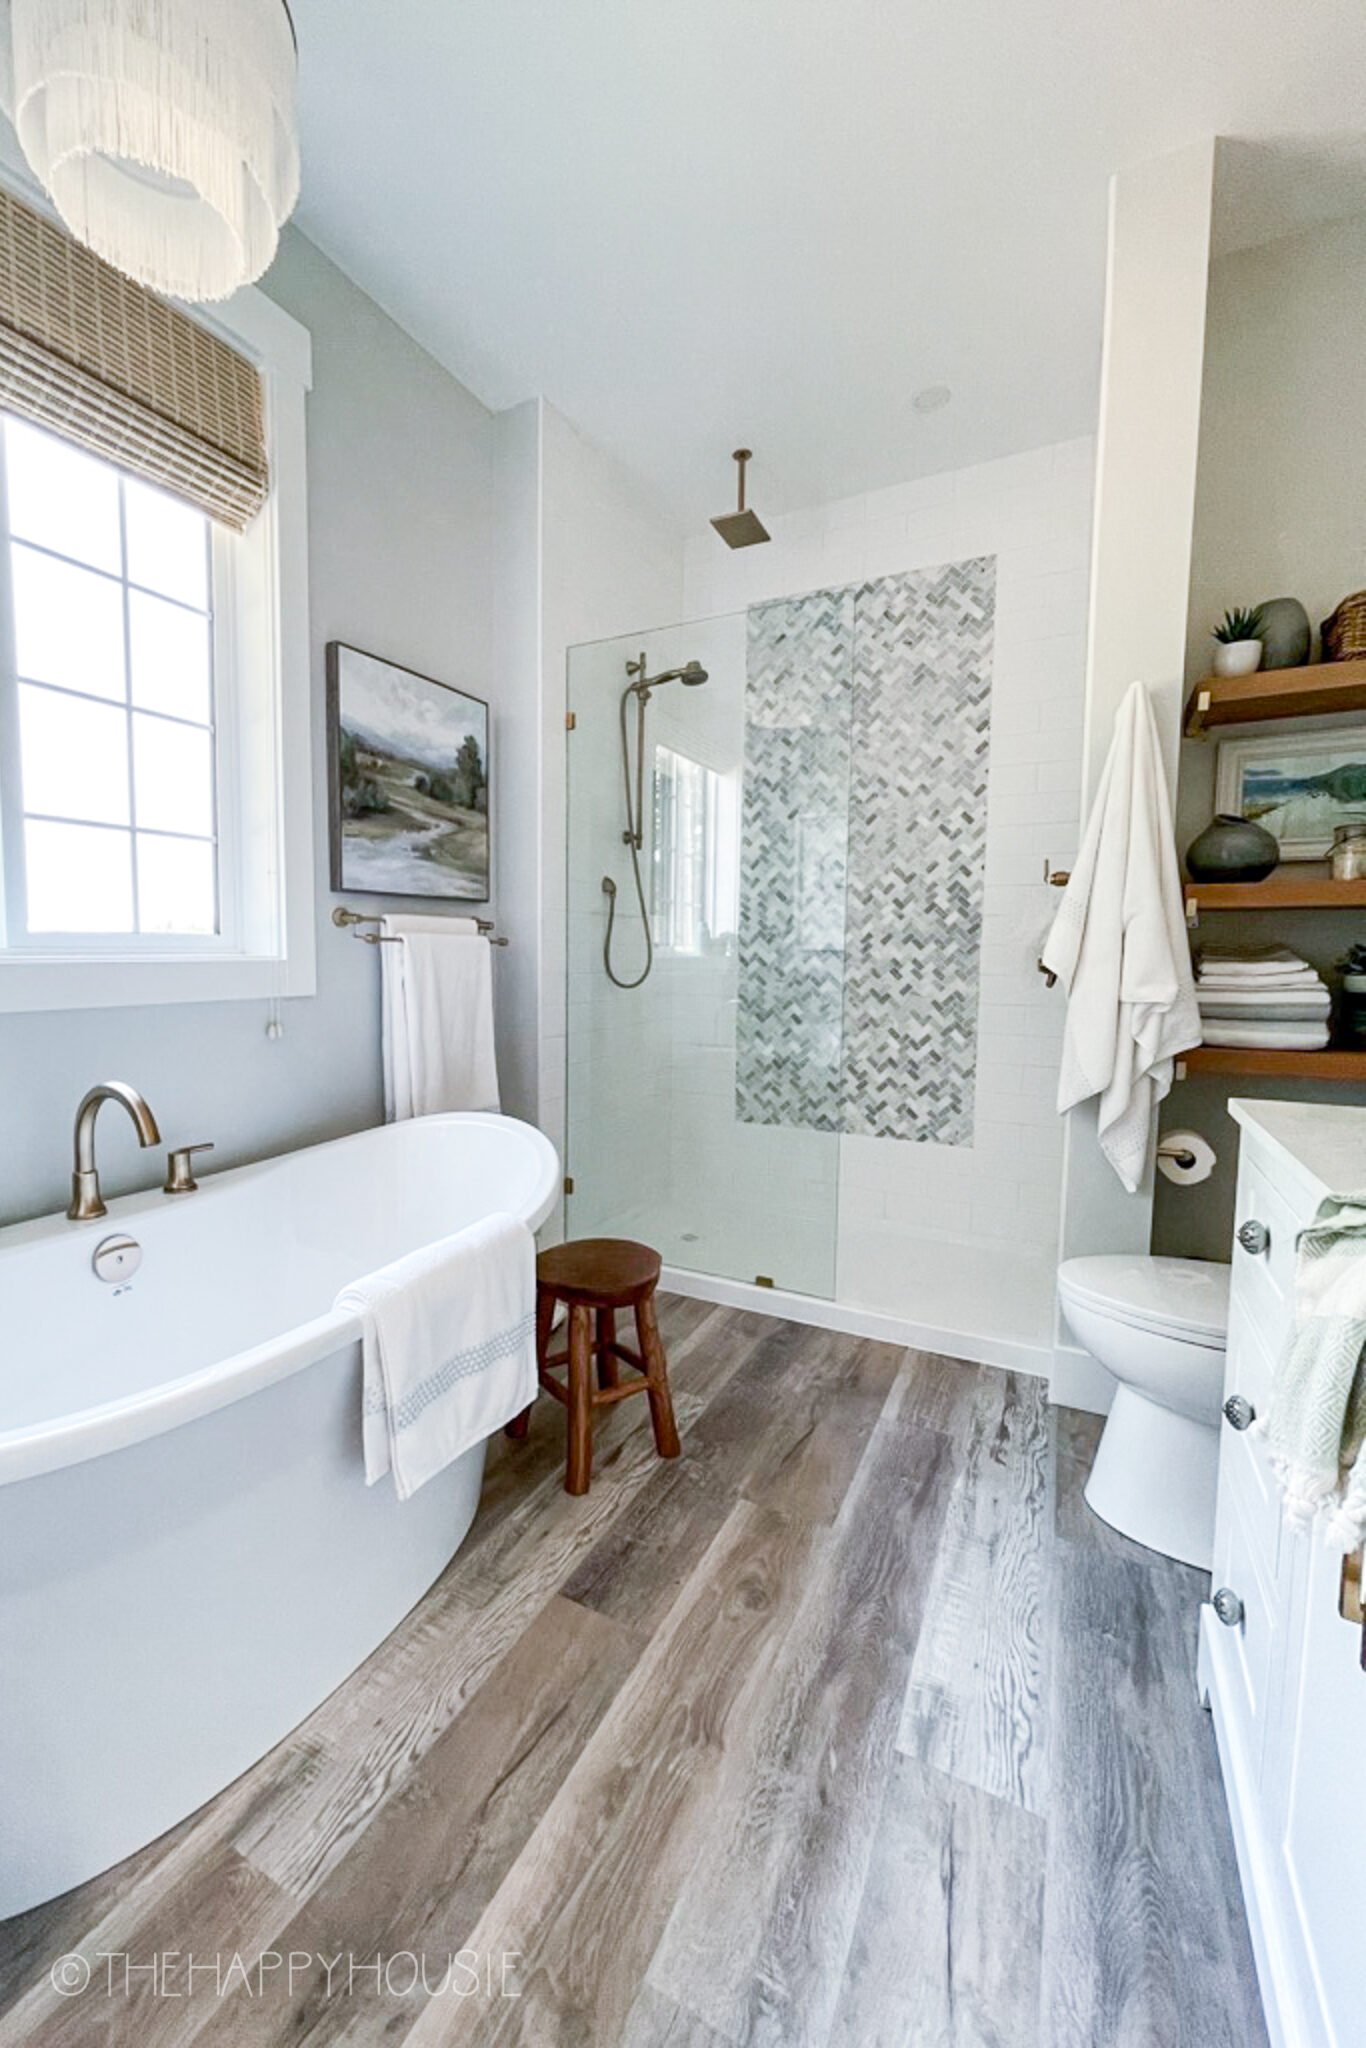 10 small bathroom flooring ideas that wow - jenna kate at home